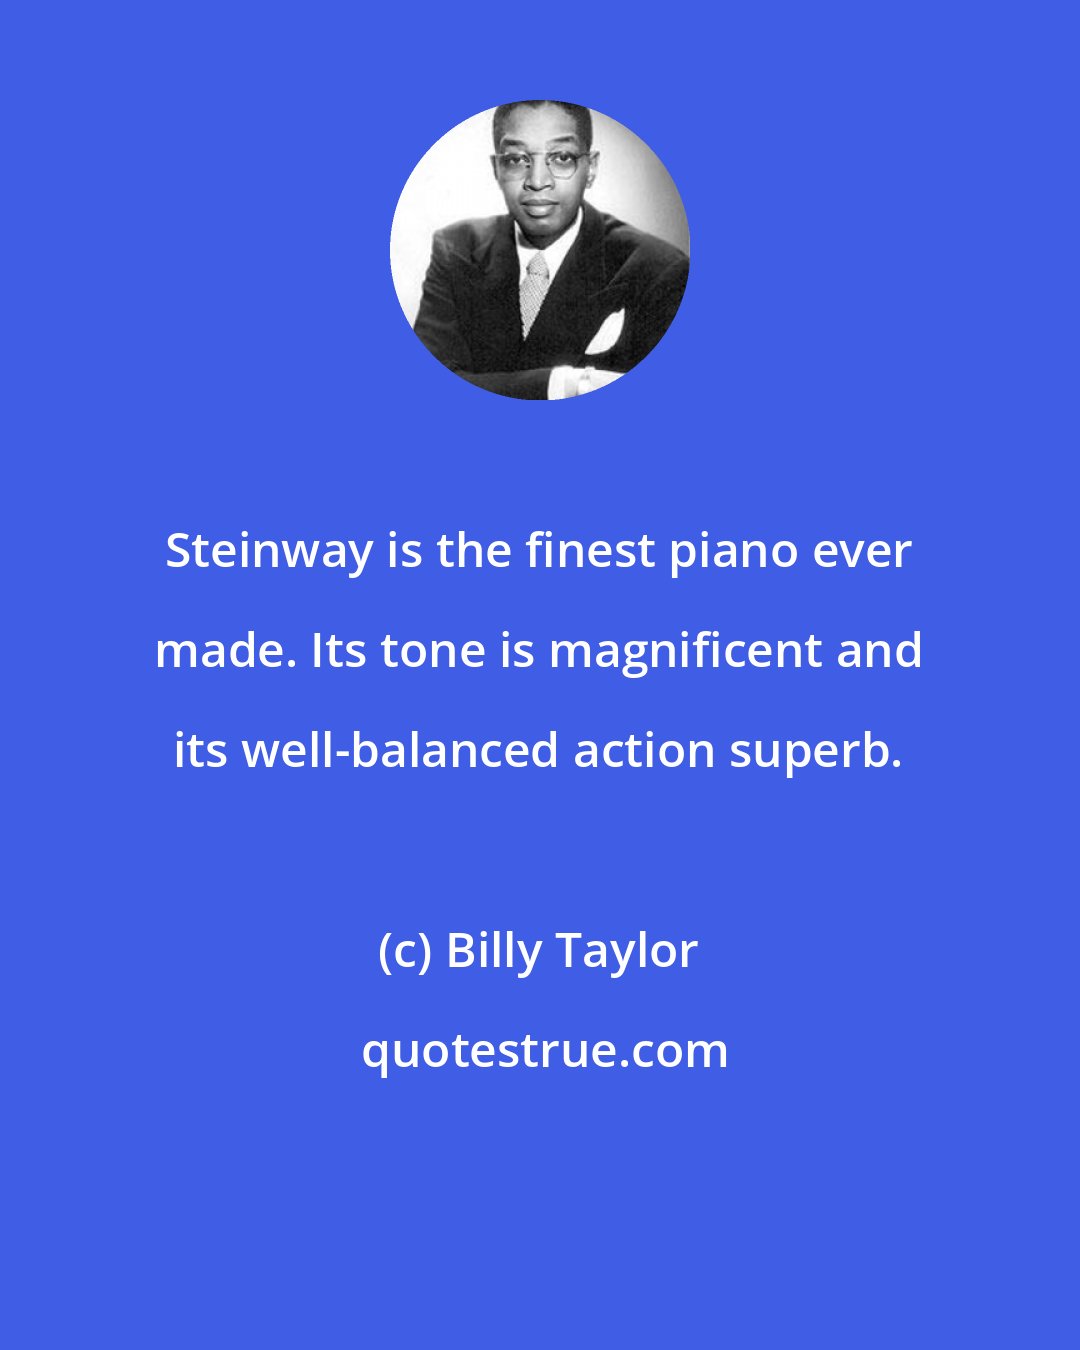 Billy Taylor: Steinway is the finest piano ever made. Its tone is magnificent and its well-balanced action superb.